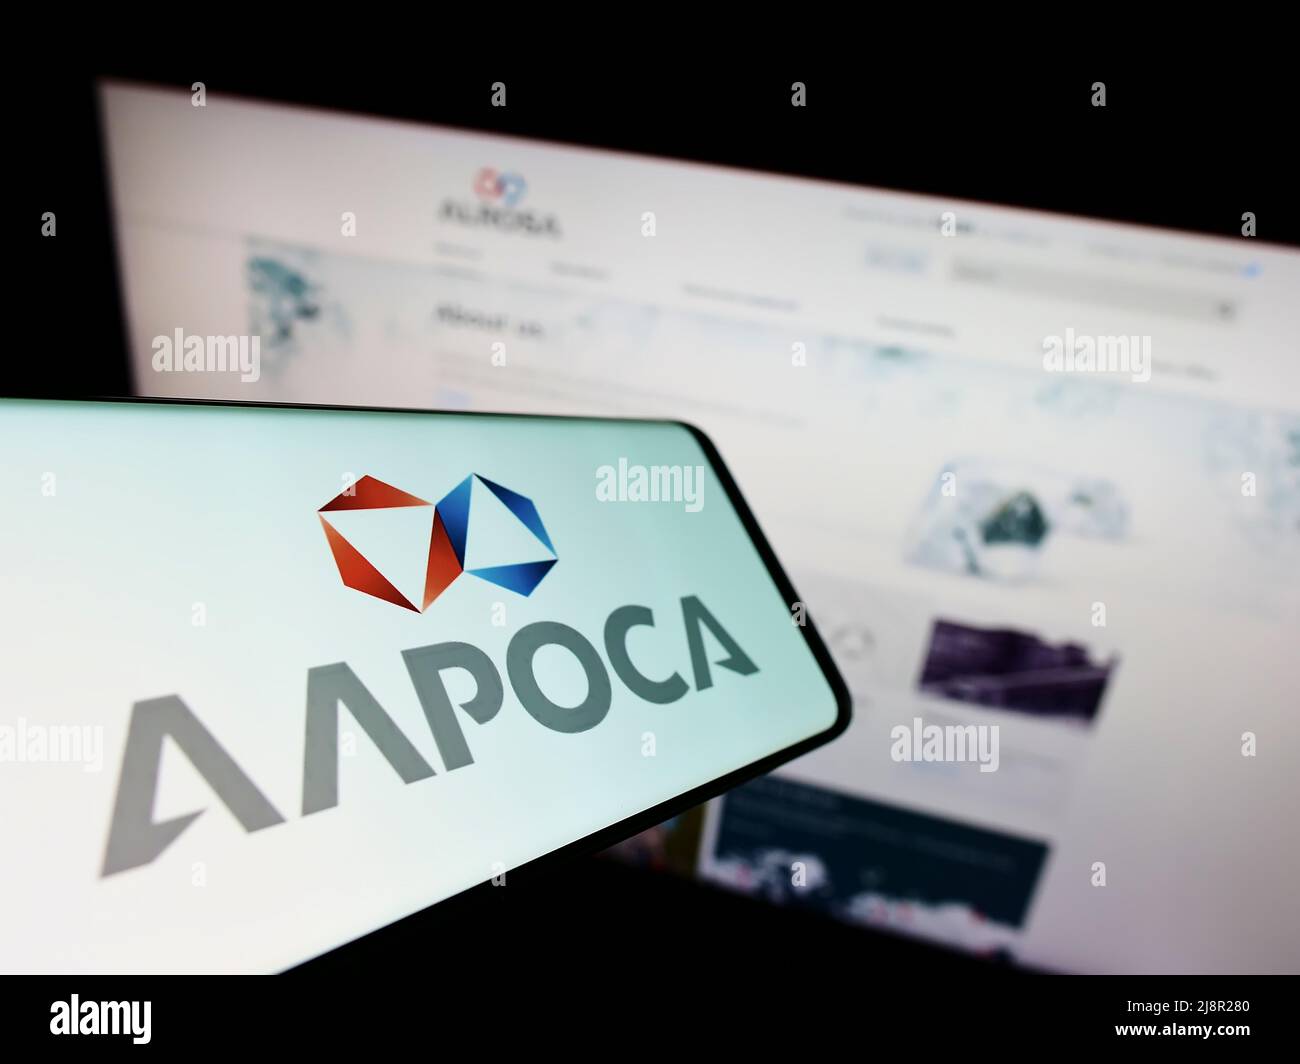 Cellphone with logo of Russian diamond mining company Alrosa PJSC on screen in front of business website. Focus on center-right of phone display. Stock Photo